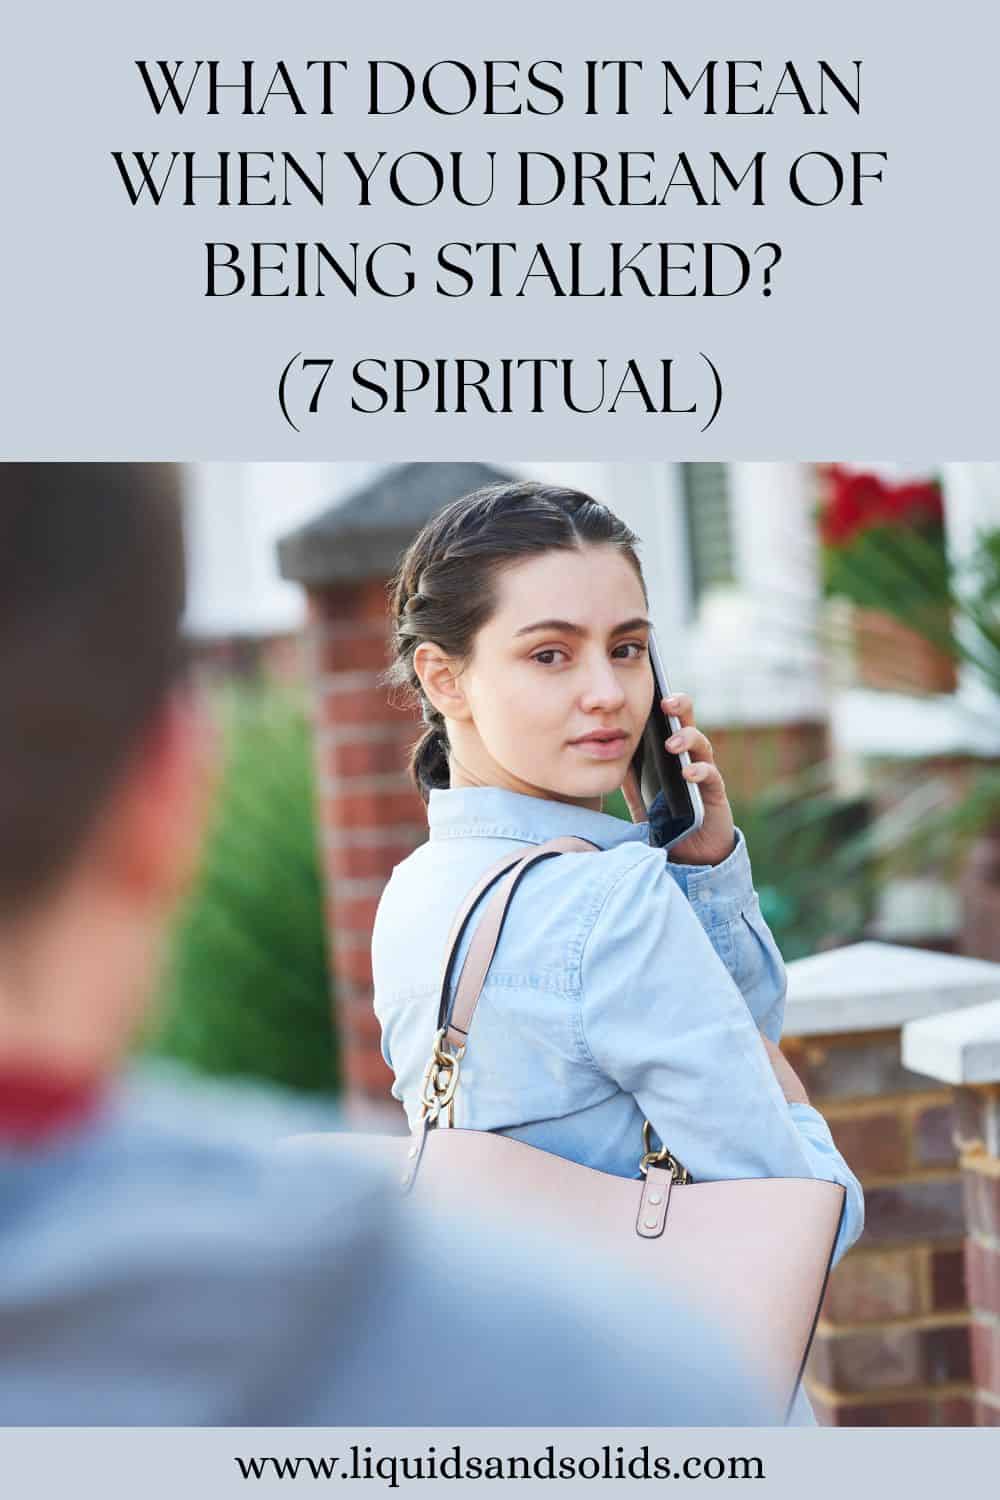 What Does It Mean When You Dream of Being Stalked? (7 Spiritual)